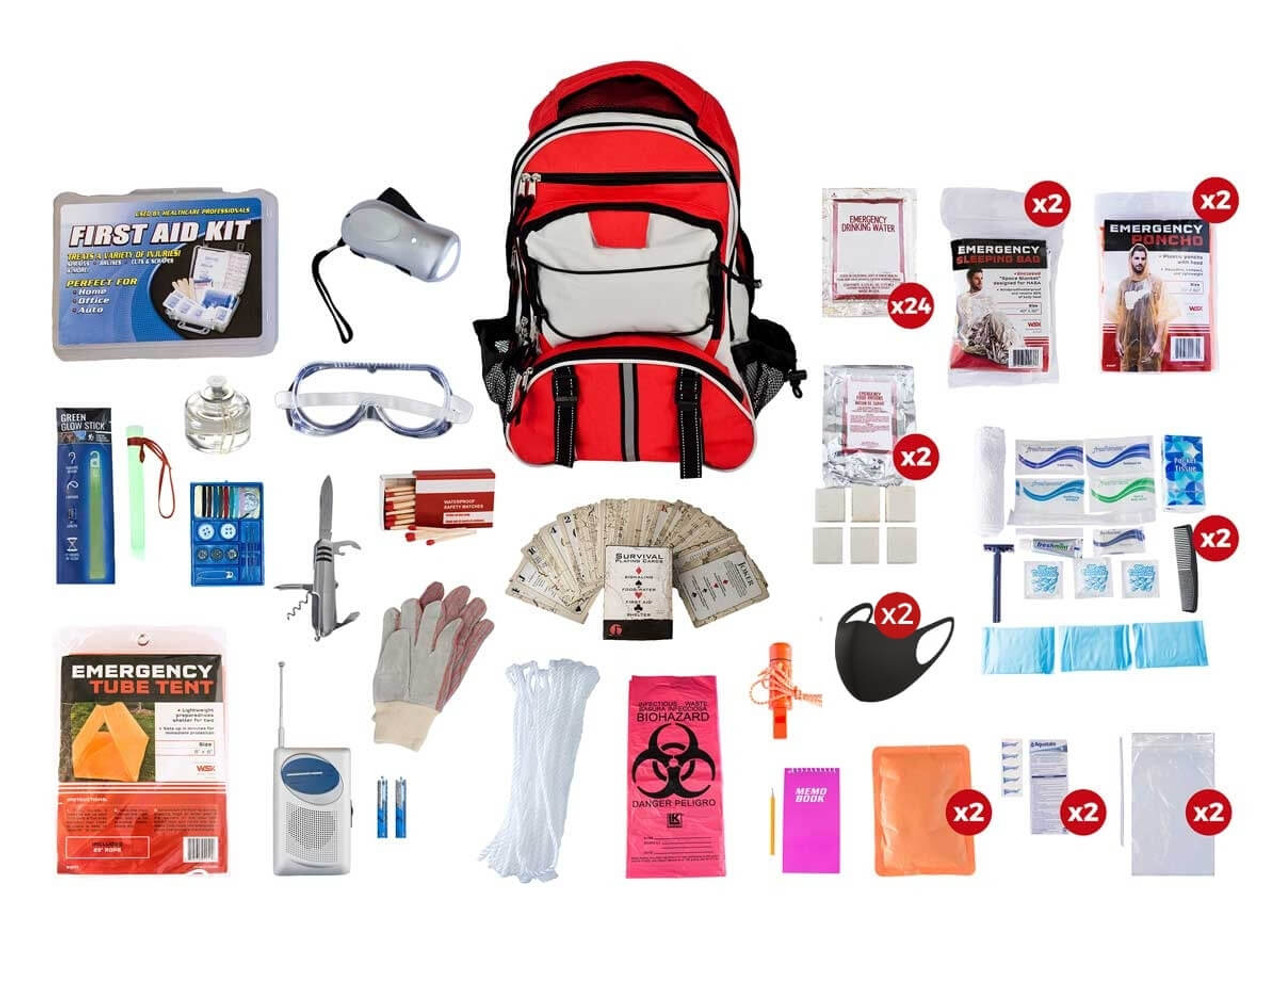 4 Person Deluxe Emergency Kit (3 Day Backpack) – QuakeHOLD!